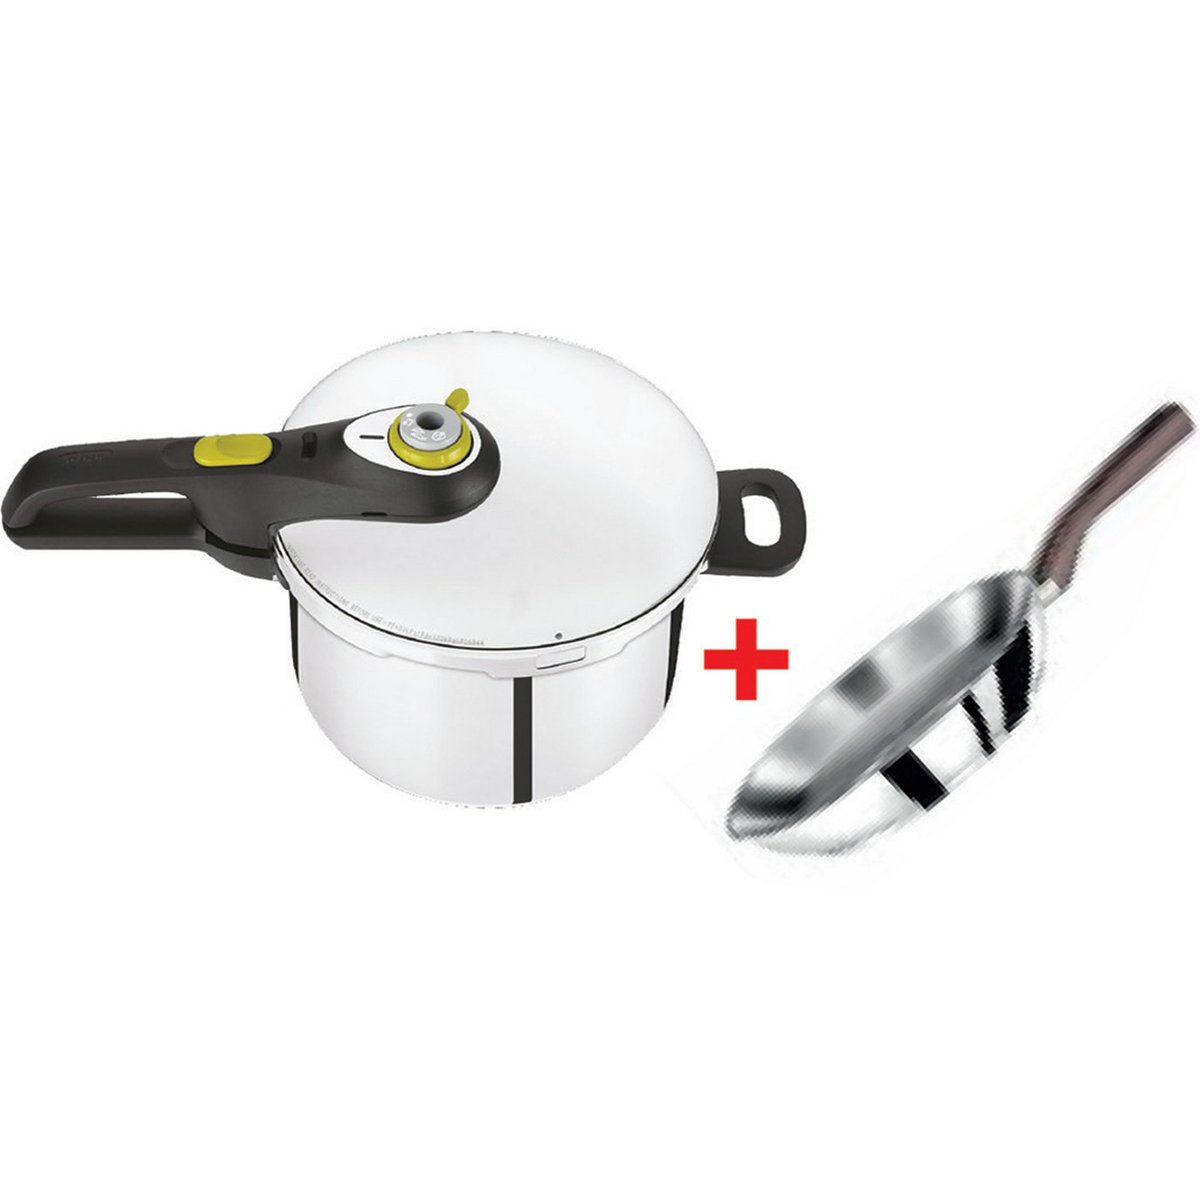 Tefal Secure Neo Pressure Cooker 6Ltr + Intuition Fry Pan 20cm